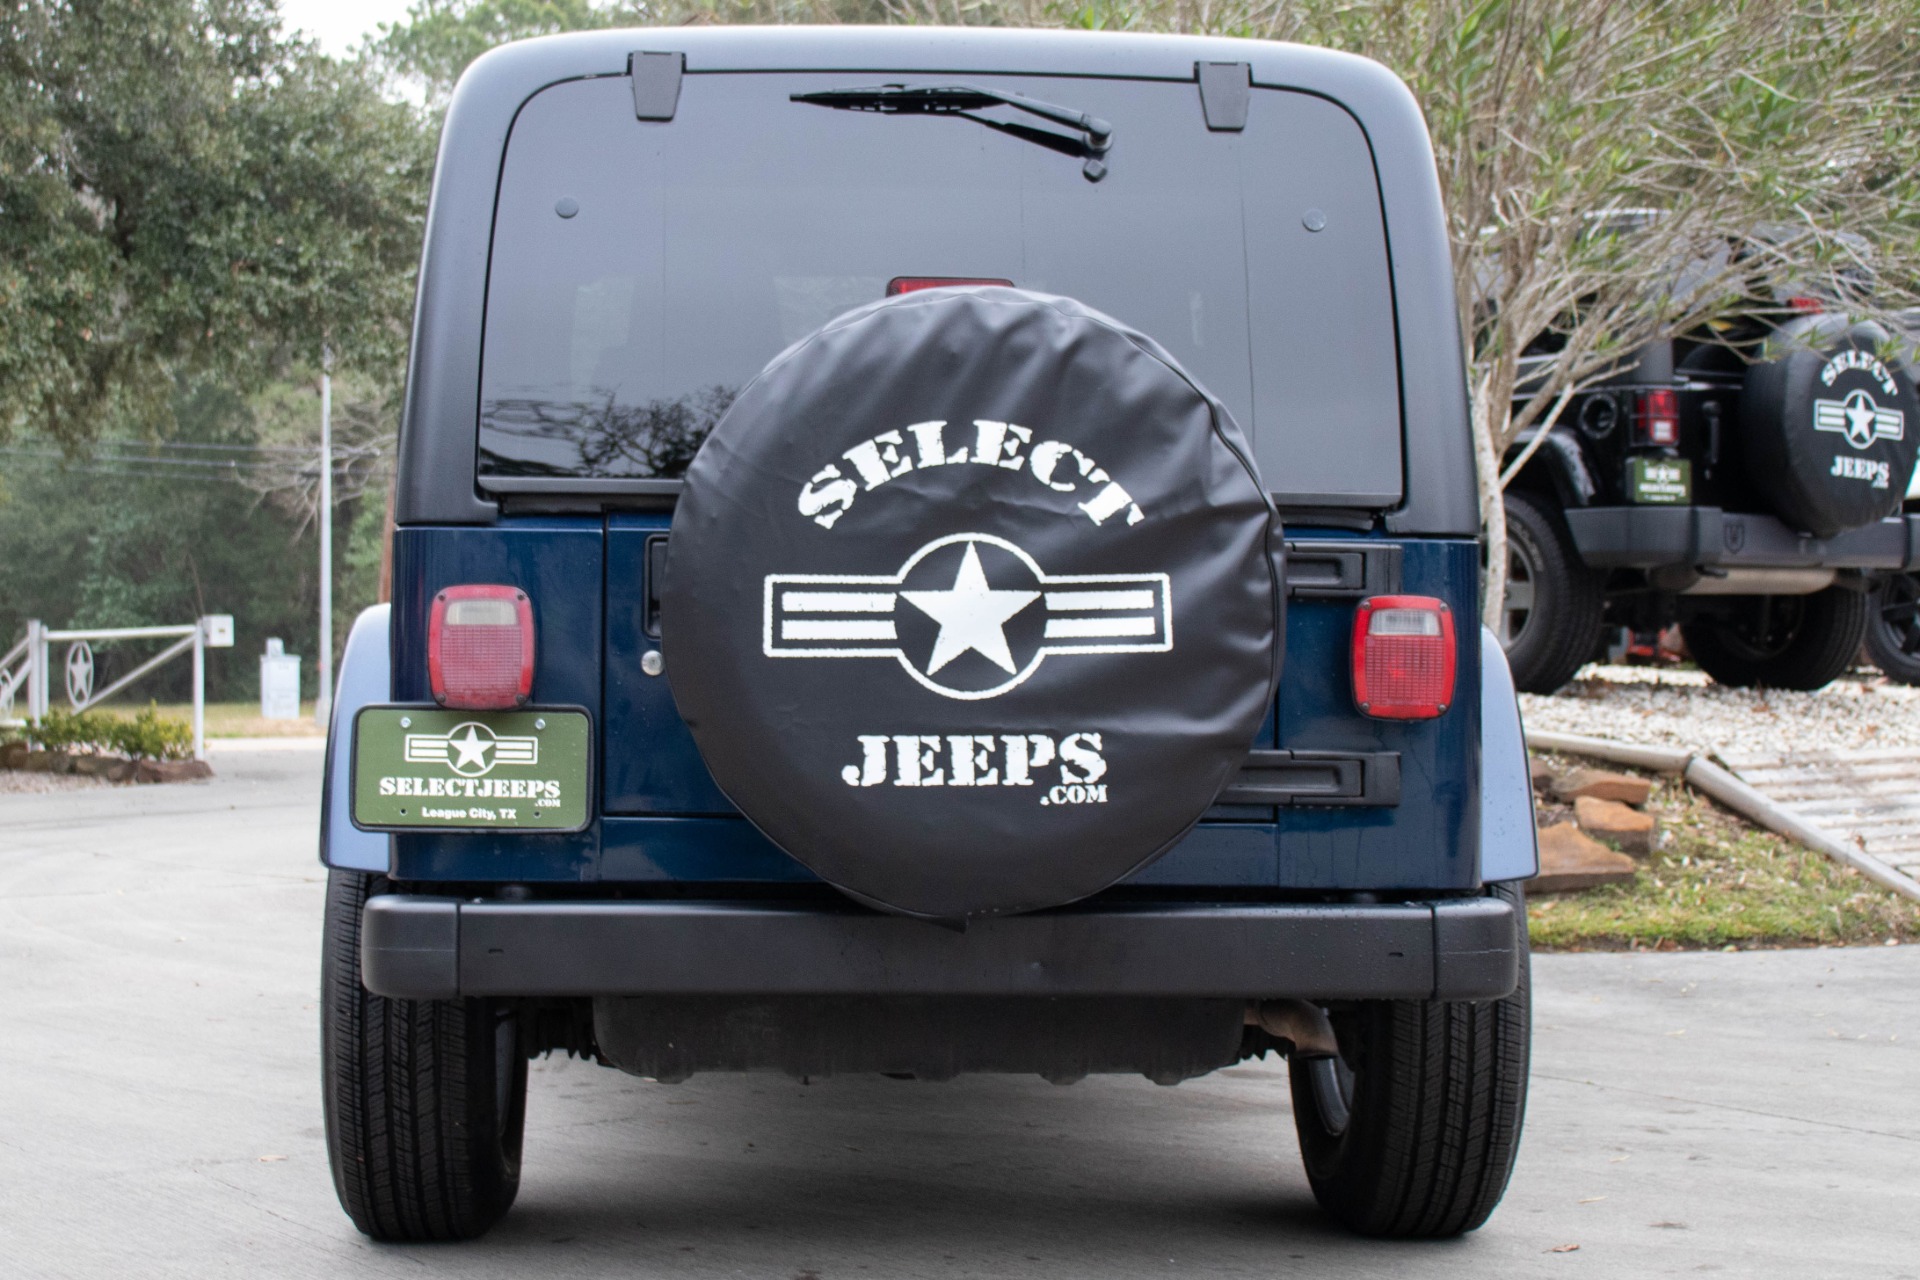 Used 2005 Jeep Wrangler Rocky Mountain For Sale ($12,995) | Select Jeeps  Inc. Stock #363190